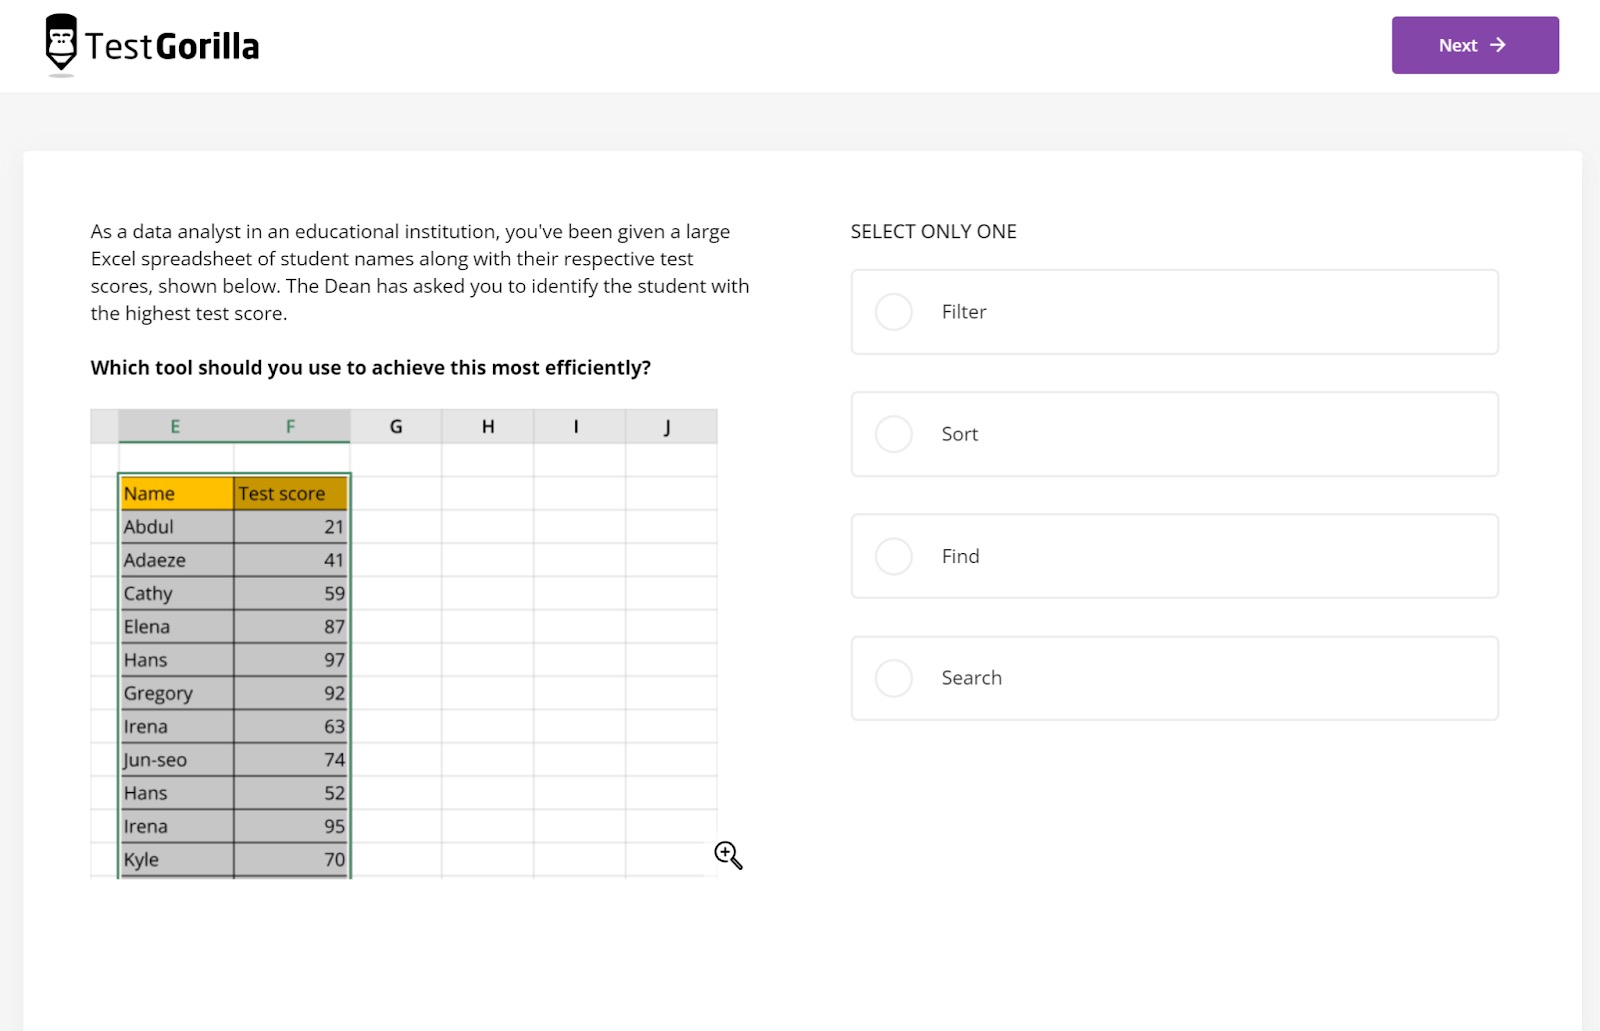 An example question from TestGorilla's Microsoft Excel test